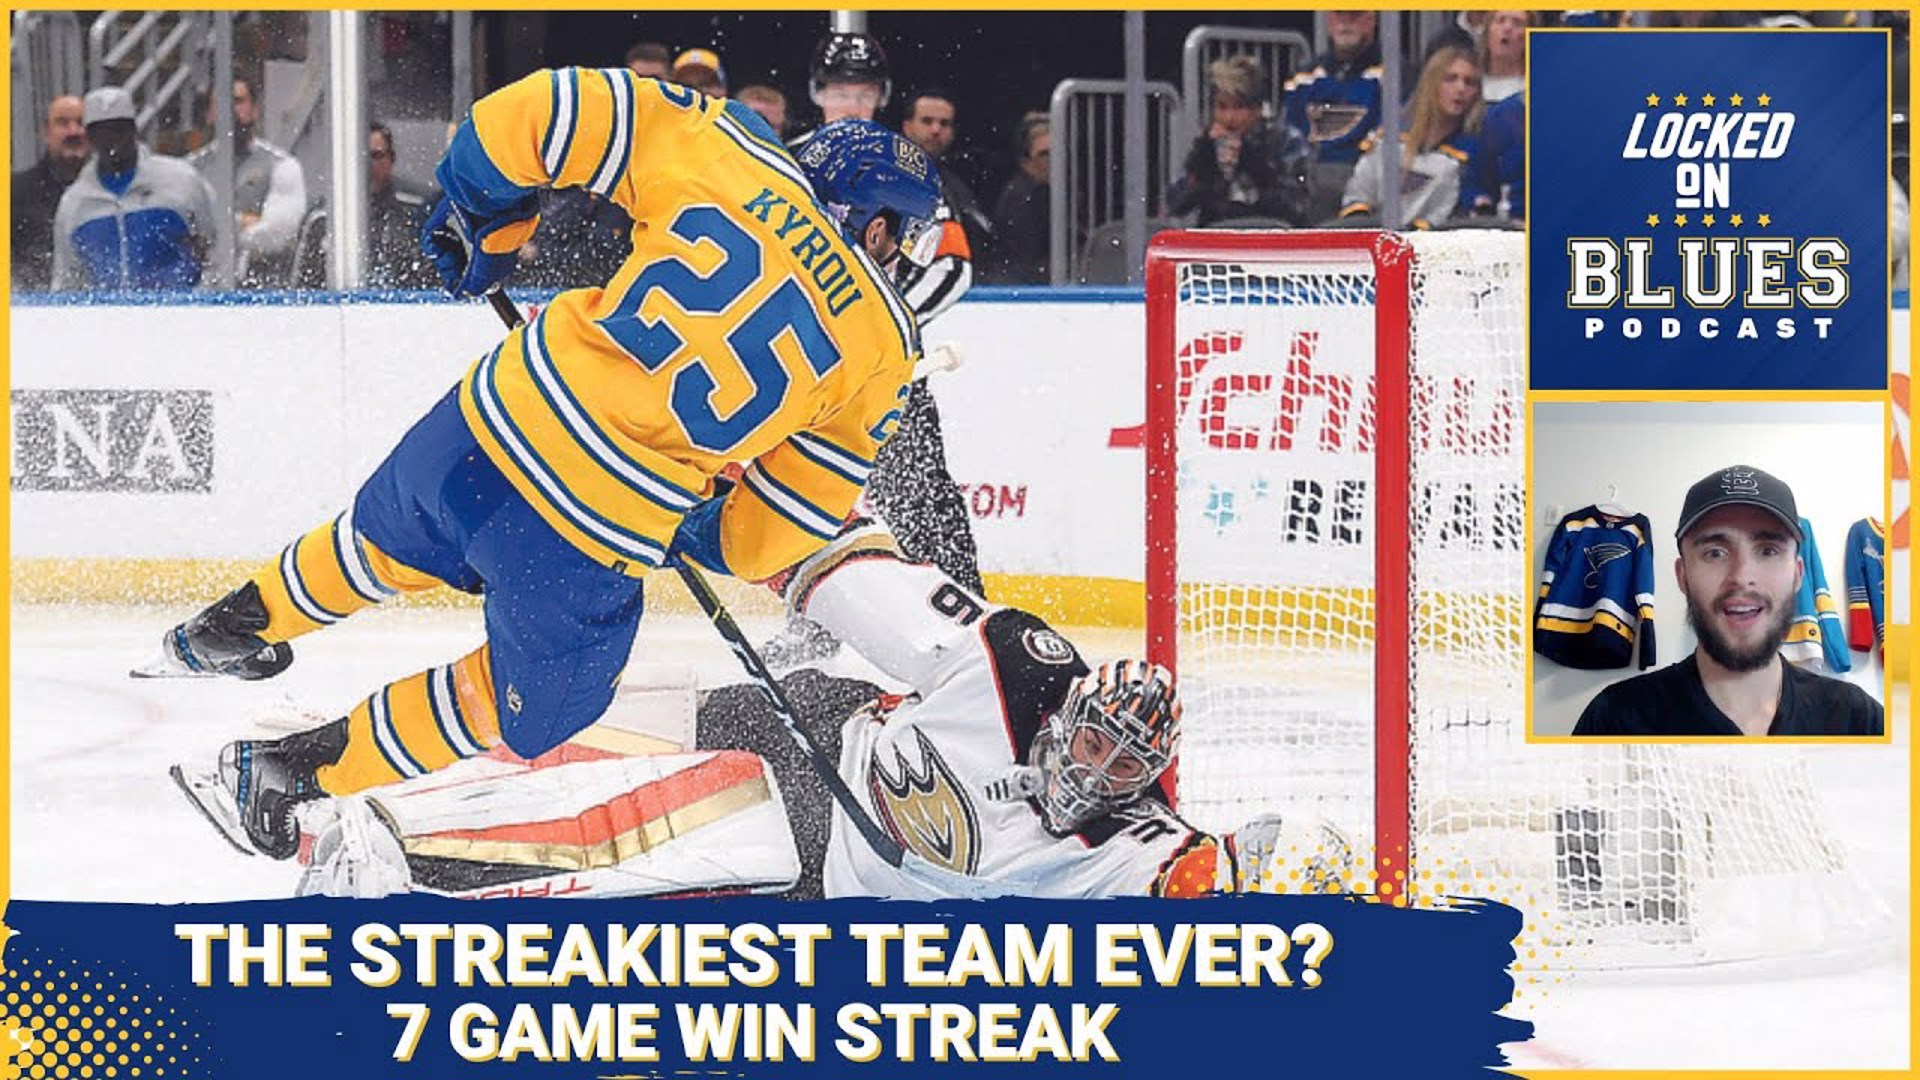 Josh Hyman covers the St. Louis Blues 7-game winning streak. He discusses the inconsistency of the Blues' play so far and whether or not this streak is sustainable.